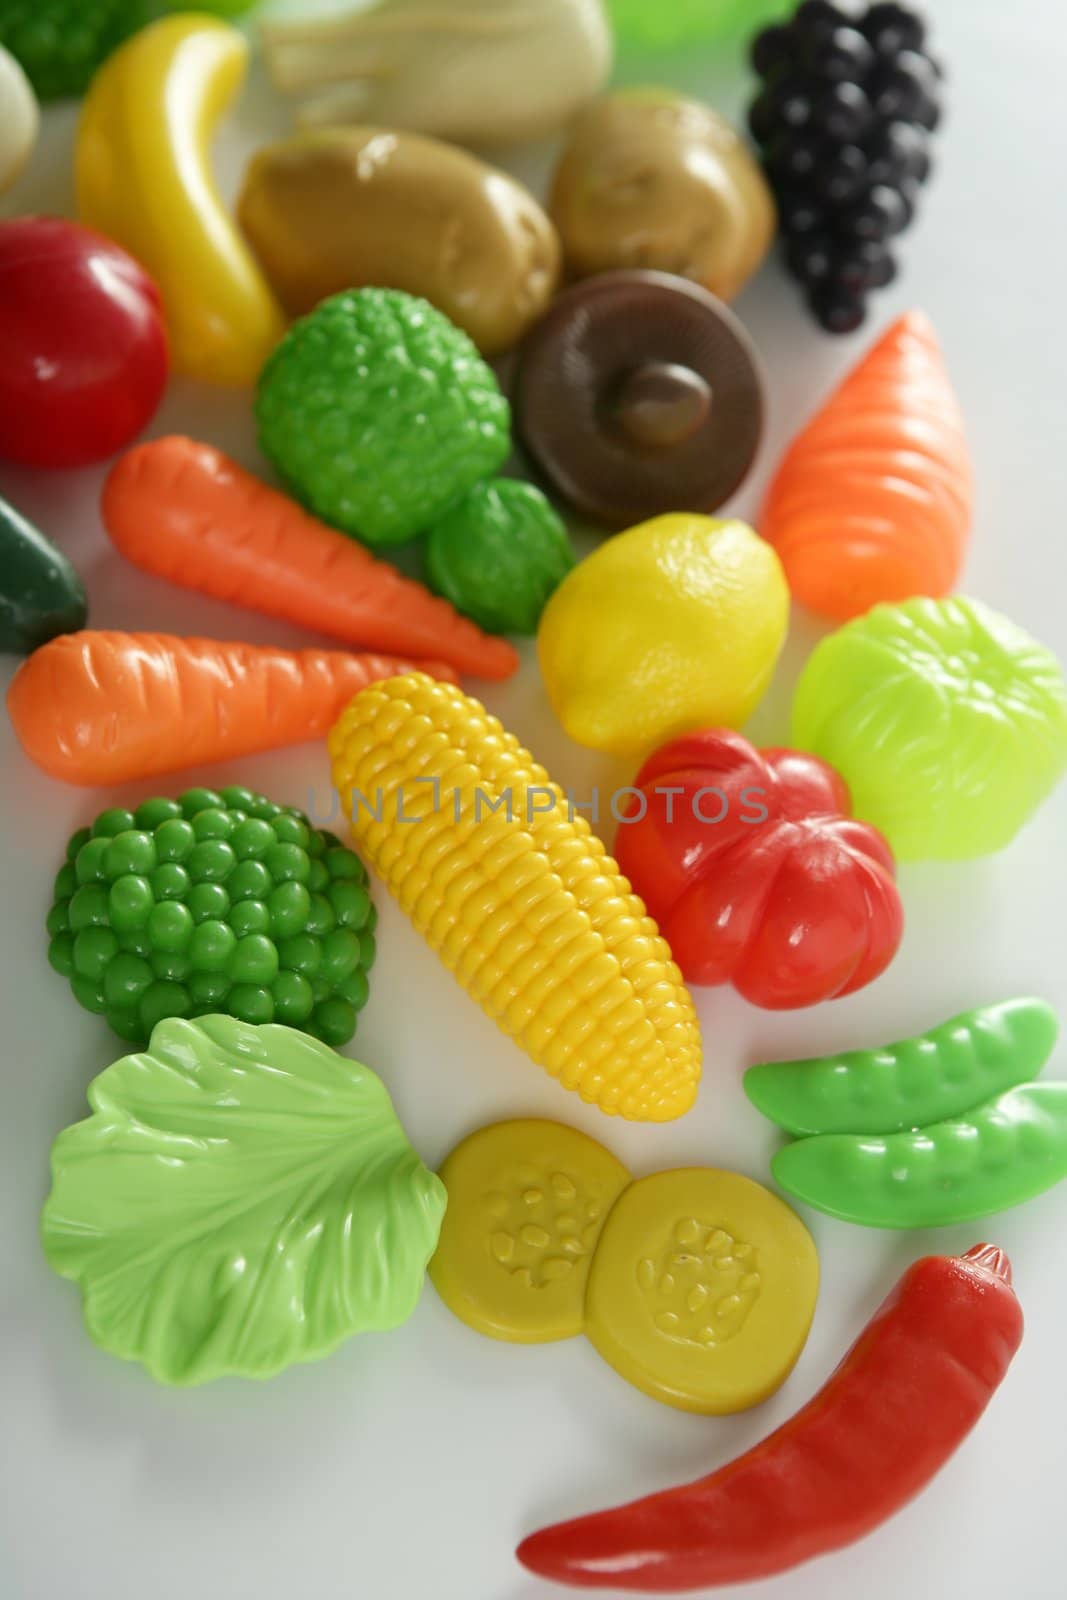 Plastic game, fake varied vegetables and fruits. Children food education toy